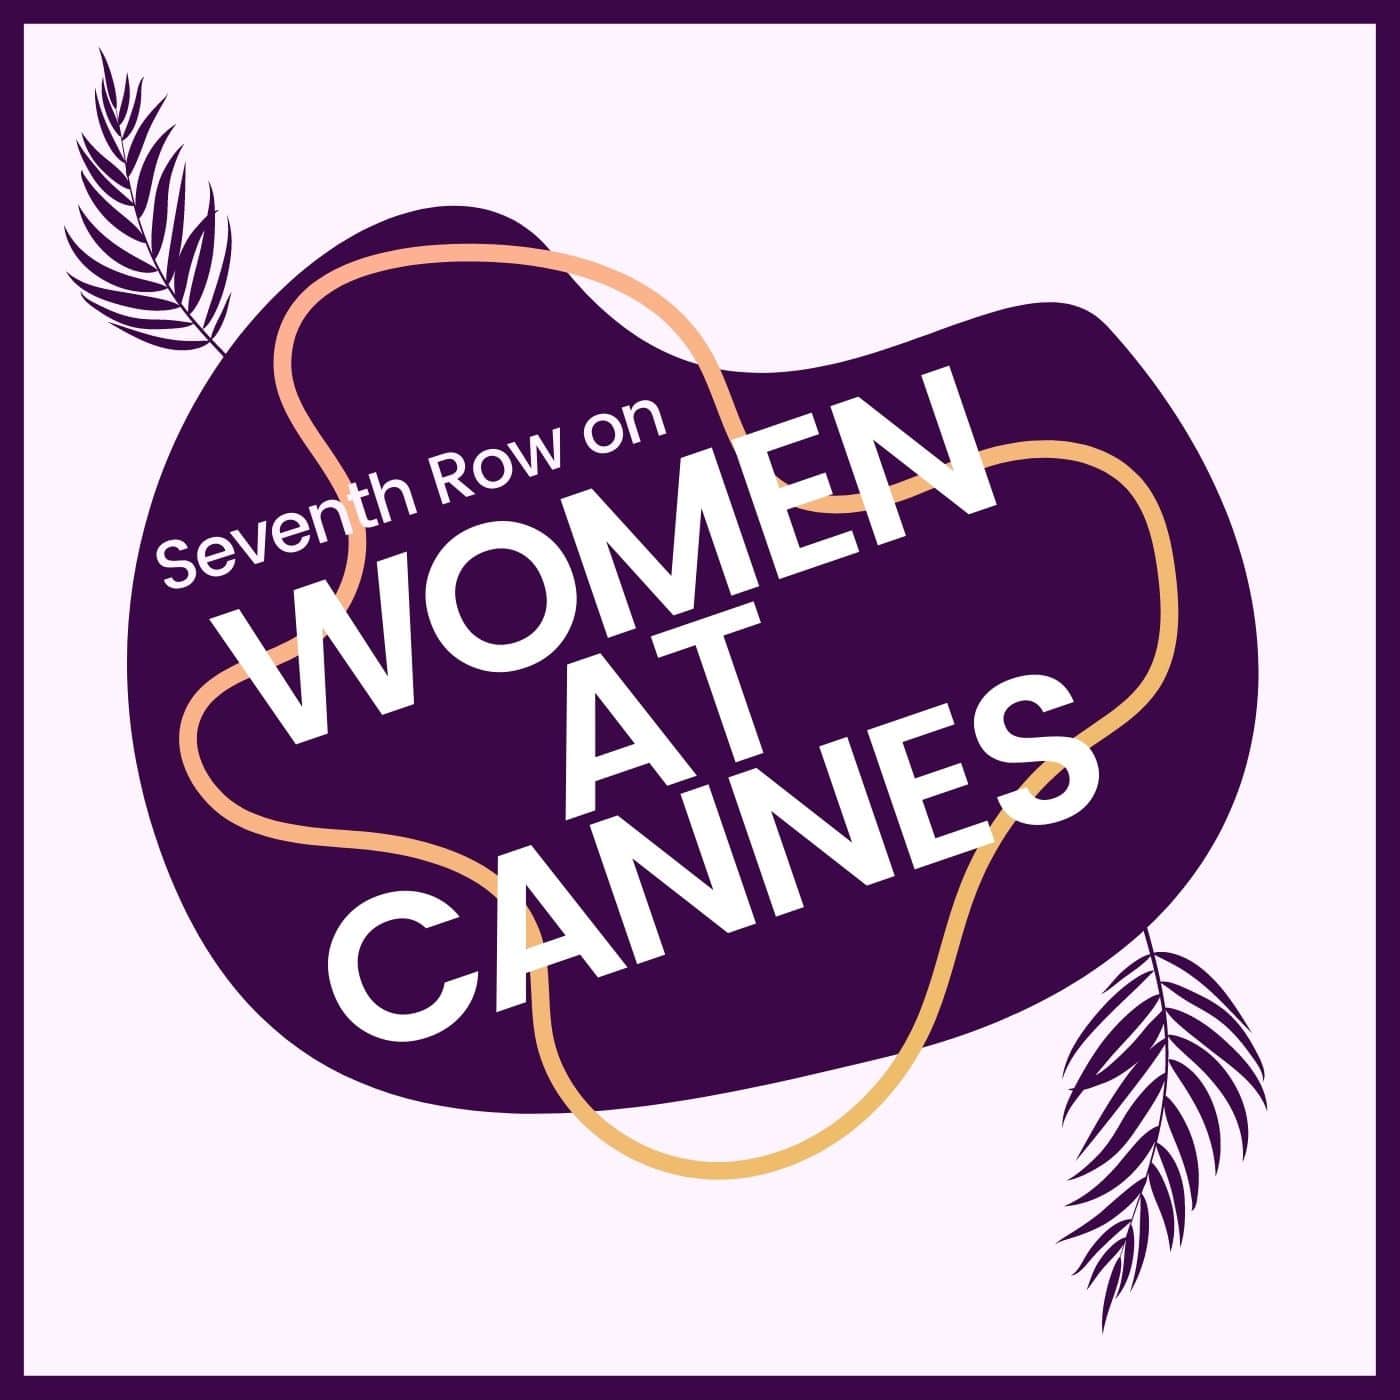 The Women at Cannes podcast seasons logo, a podcast season exploring Women directors at Cannes, like Chile 1976, the first feature film from Manuela Martelli, Falcon Lake by Charlotte Lebon, Under the Fig Trees by Erige Sehiri, Palm 75 by Chie Hayakawa, Side A by Naomi Kawase, Corsage by Marie Kreutzer